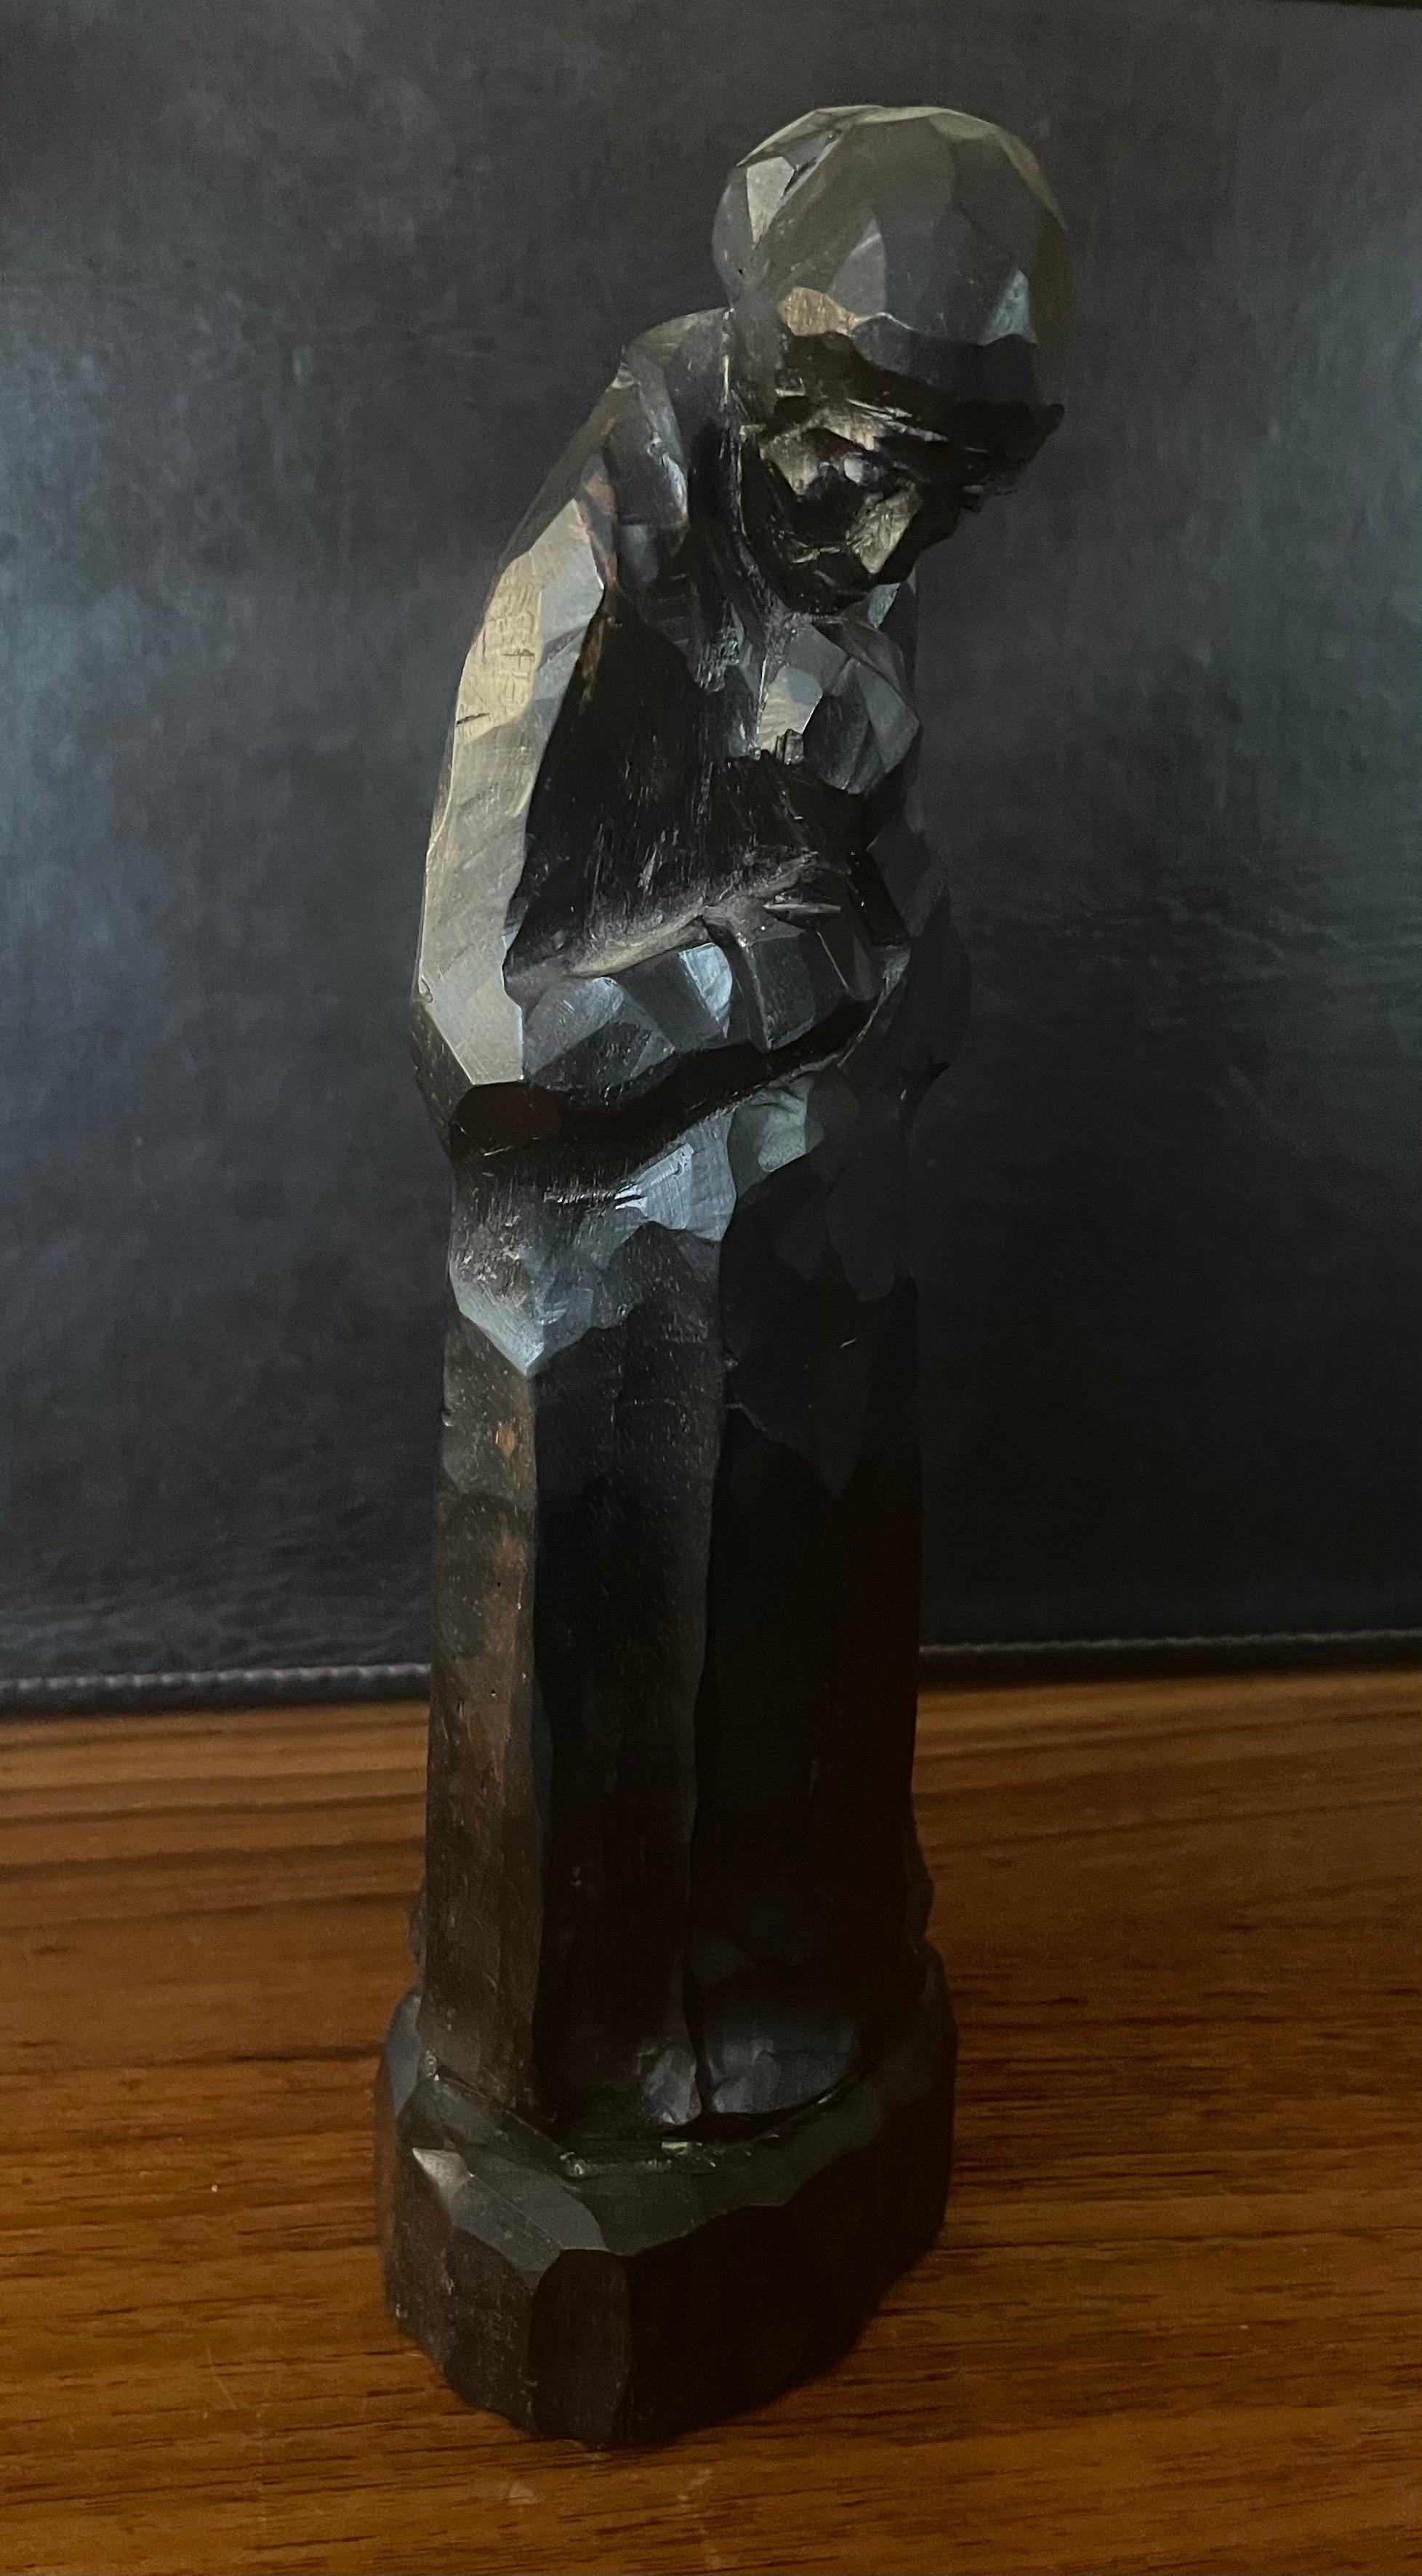 Well done antique hand-carved figurative sculpture by Anton Fortuin, circa 1926. The piece is in very good condition and measures 4.25